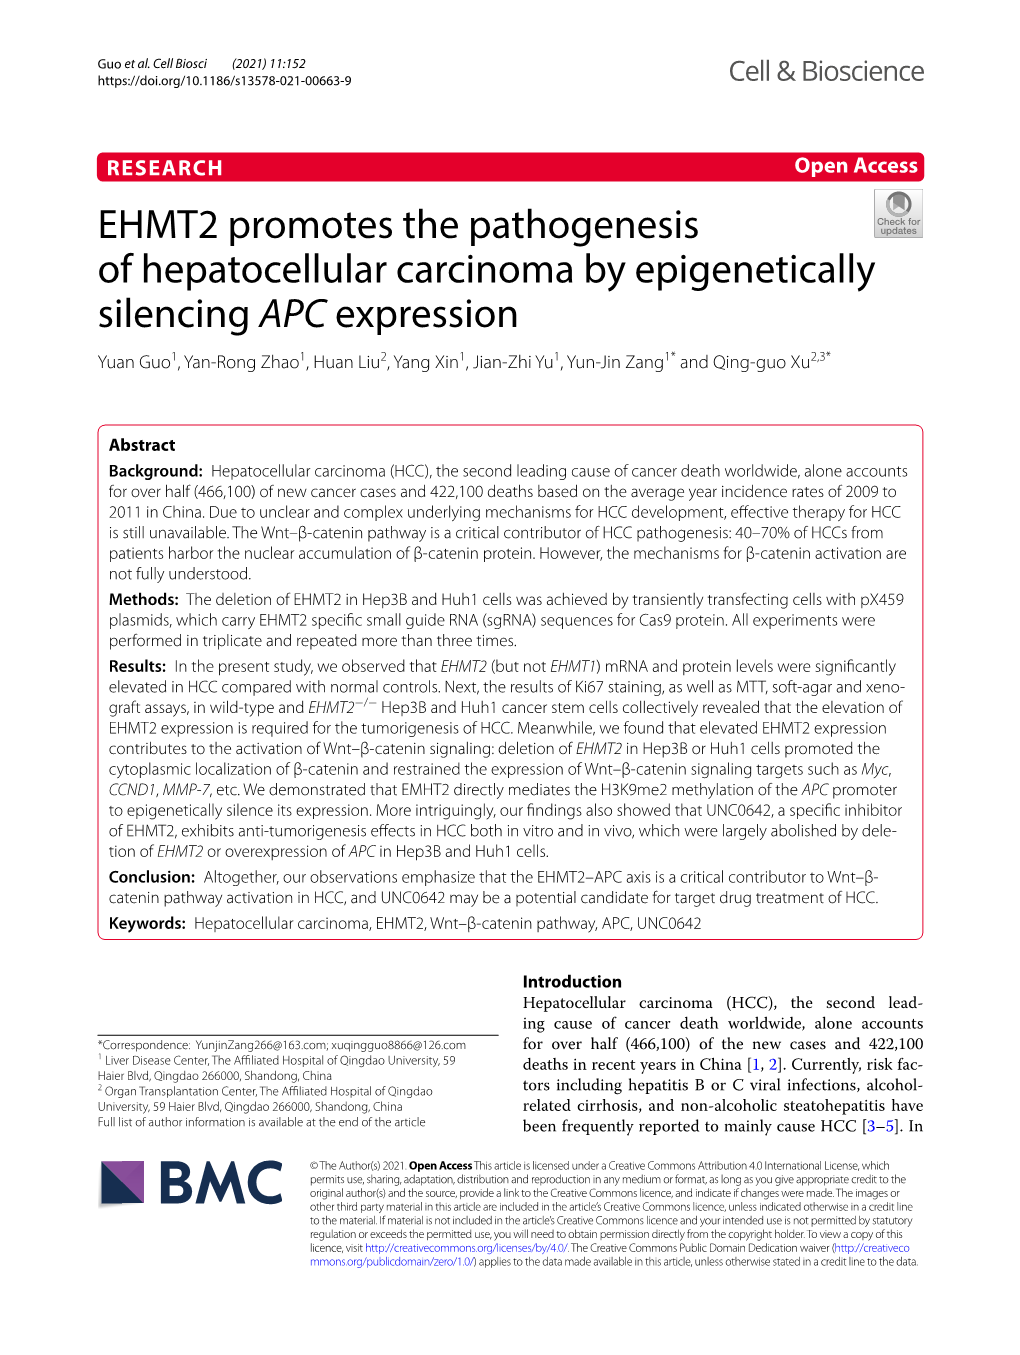 EHMT2 Promotes the Pathogenesis of Hepatocellular Carcinoma By